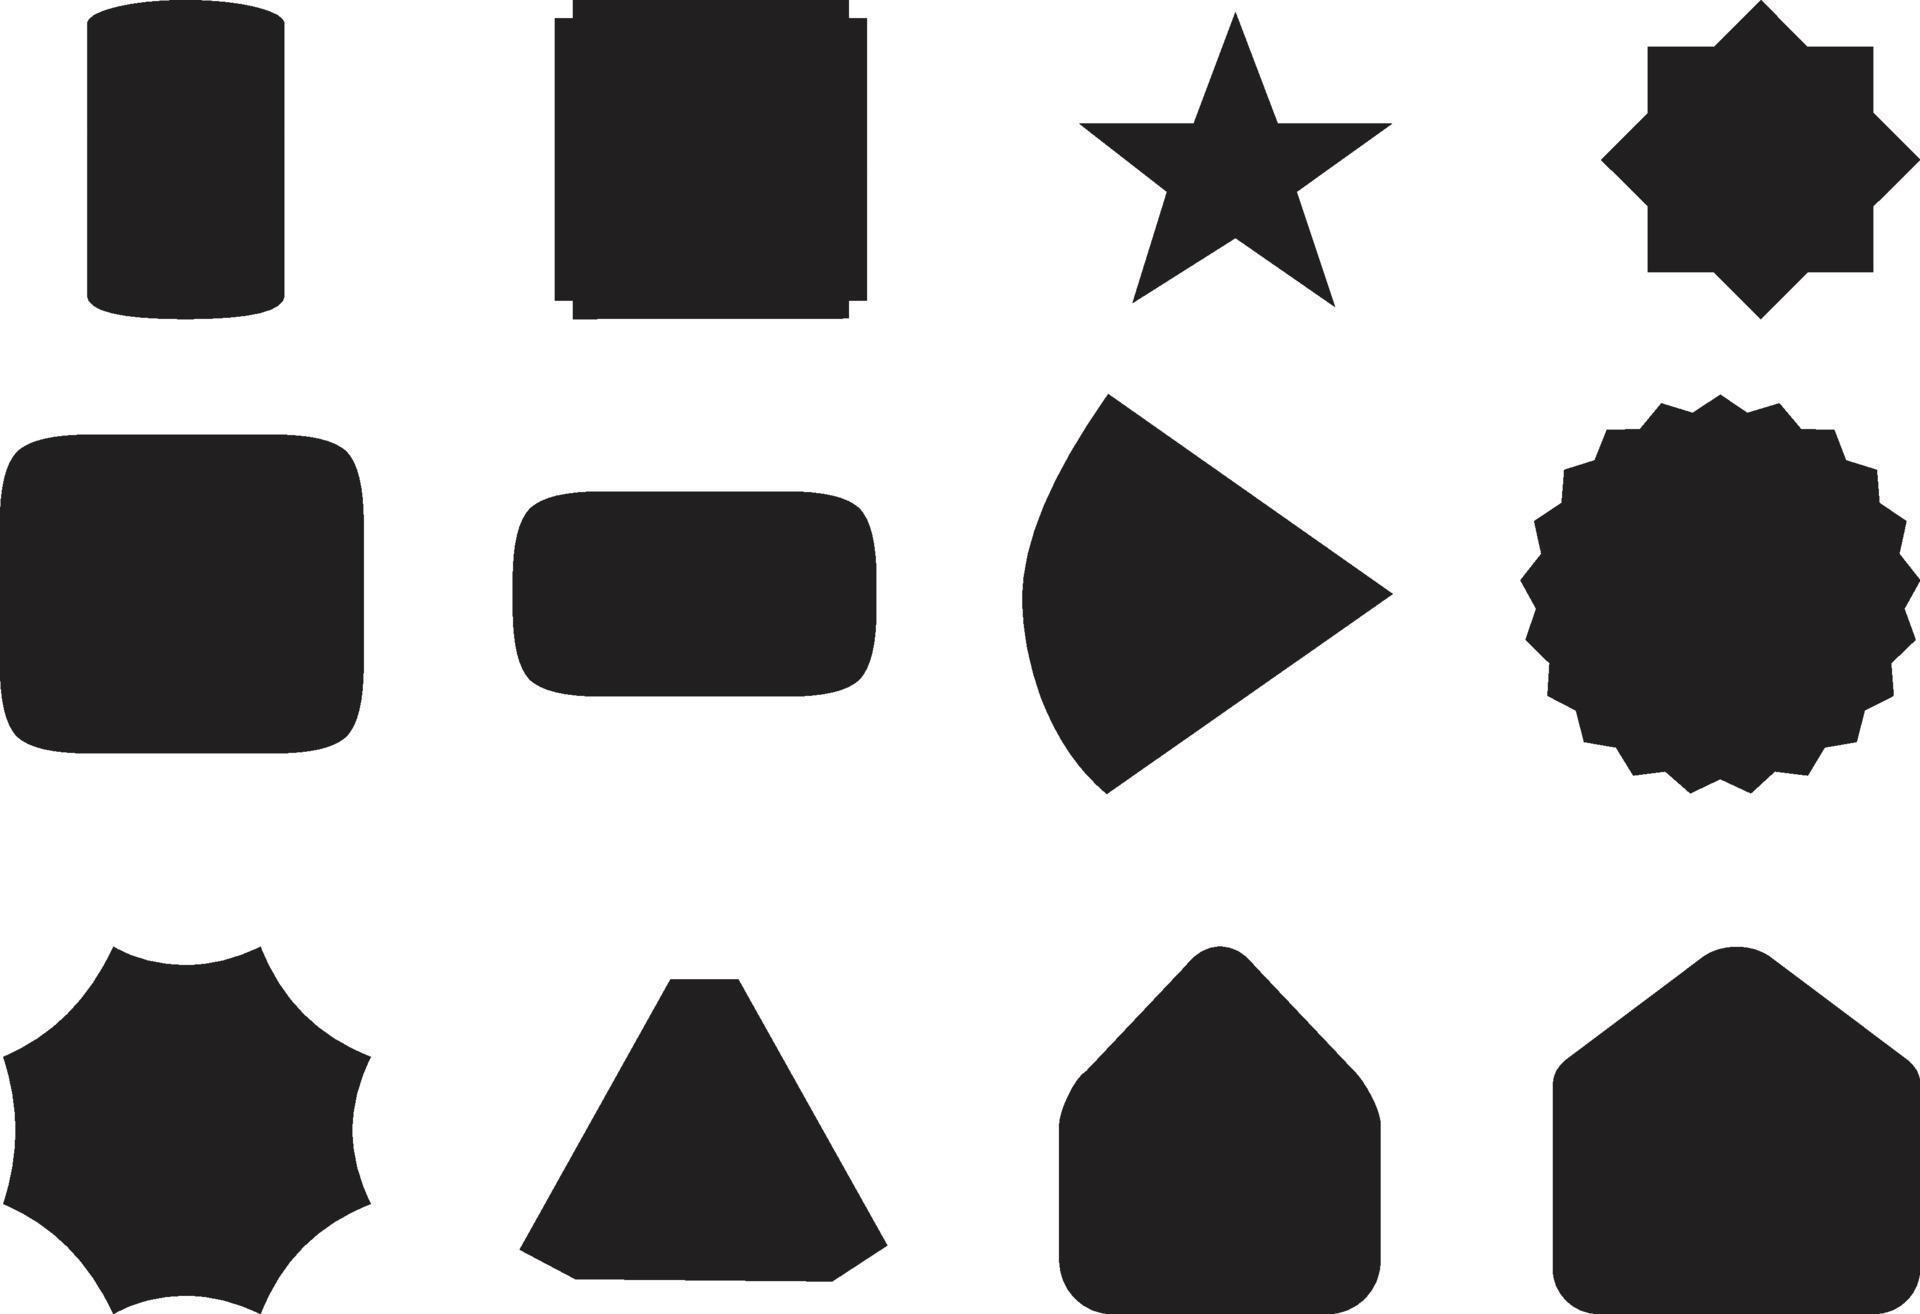 Geometric shapes black silhouette icon set. Outline cartoon abstract ...